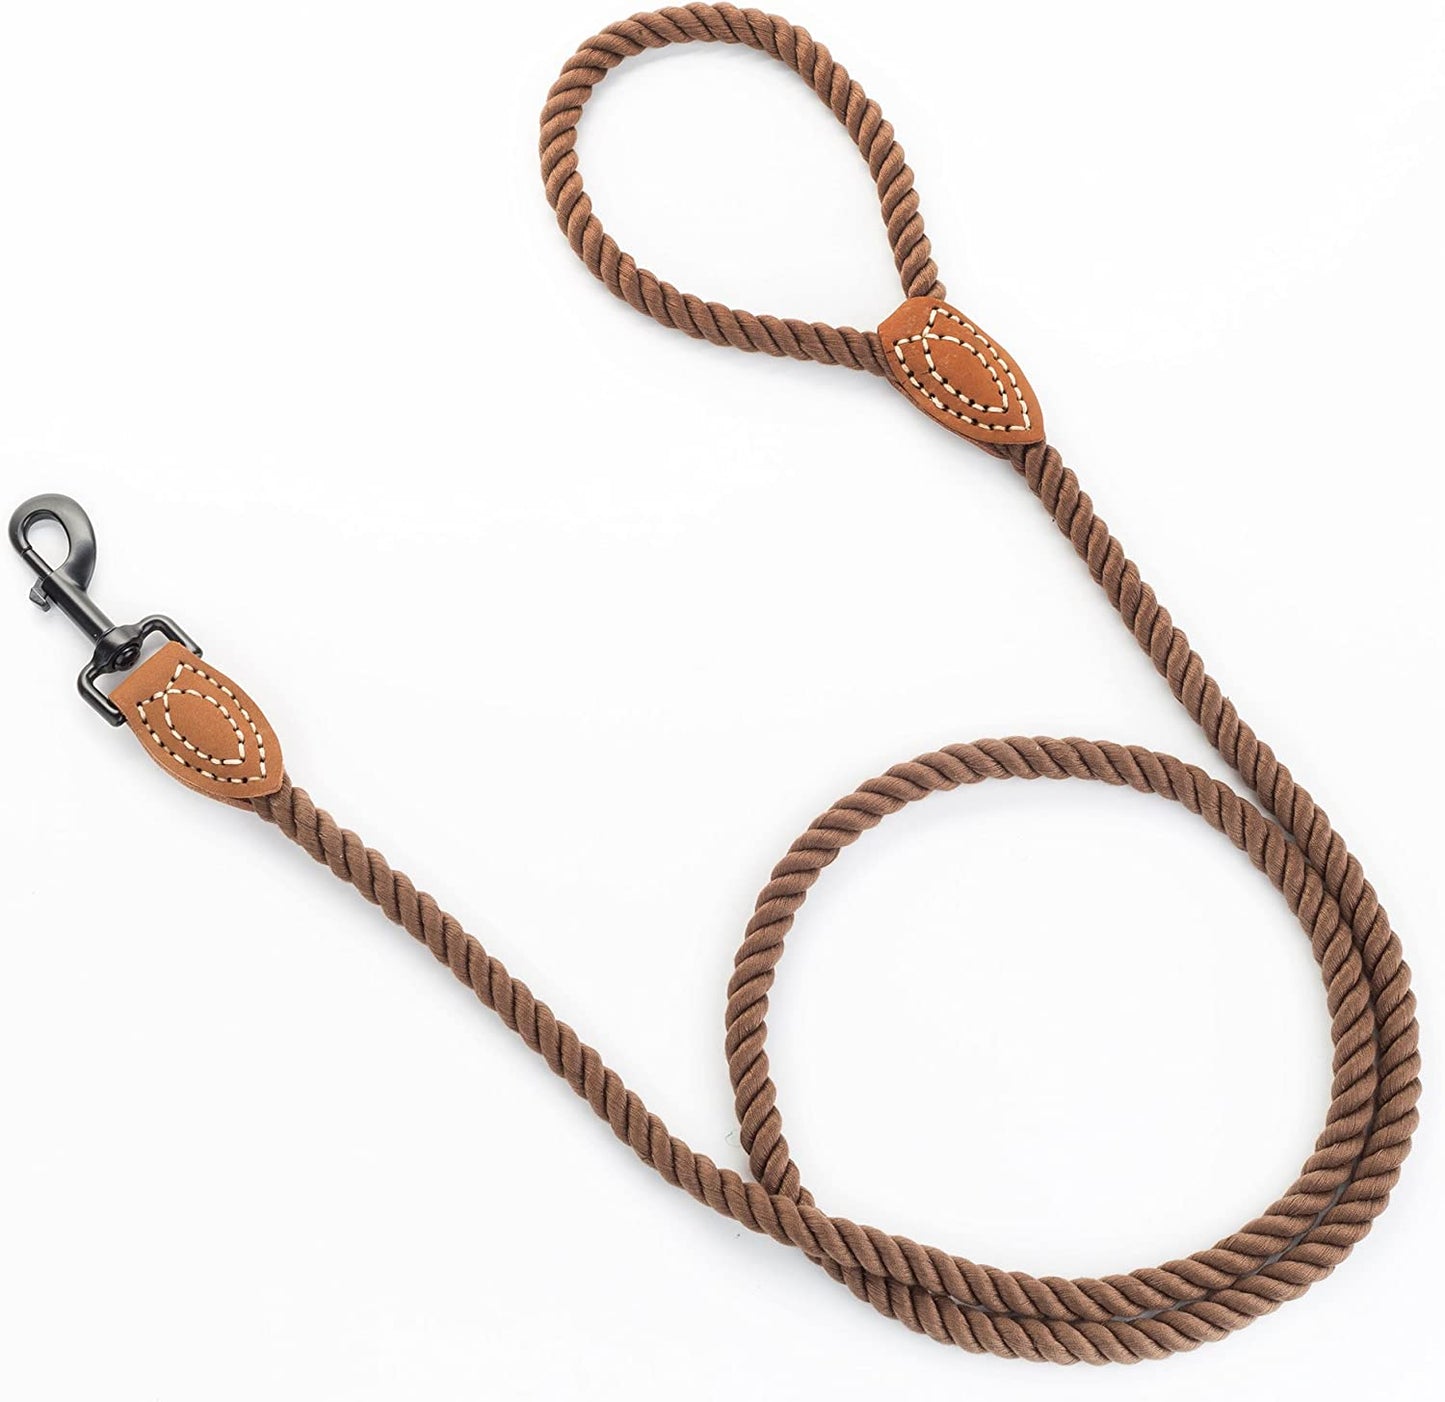 Dog Leash | Braided Cotton Rope Dog Leashes with Leather Tailor Tip | 4 Feet Dog Leash W Heavy Duty Metal Clasp | Wedding Dog Leash (Dark Brown, 48 Inches)